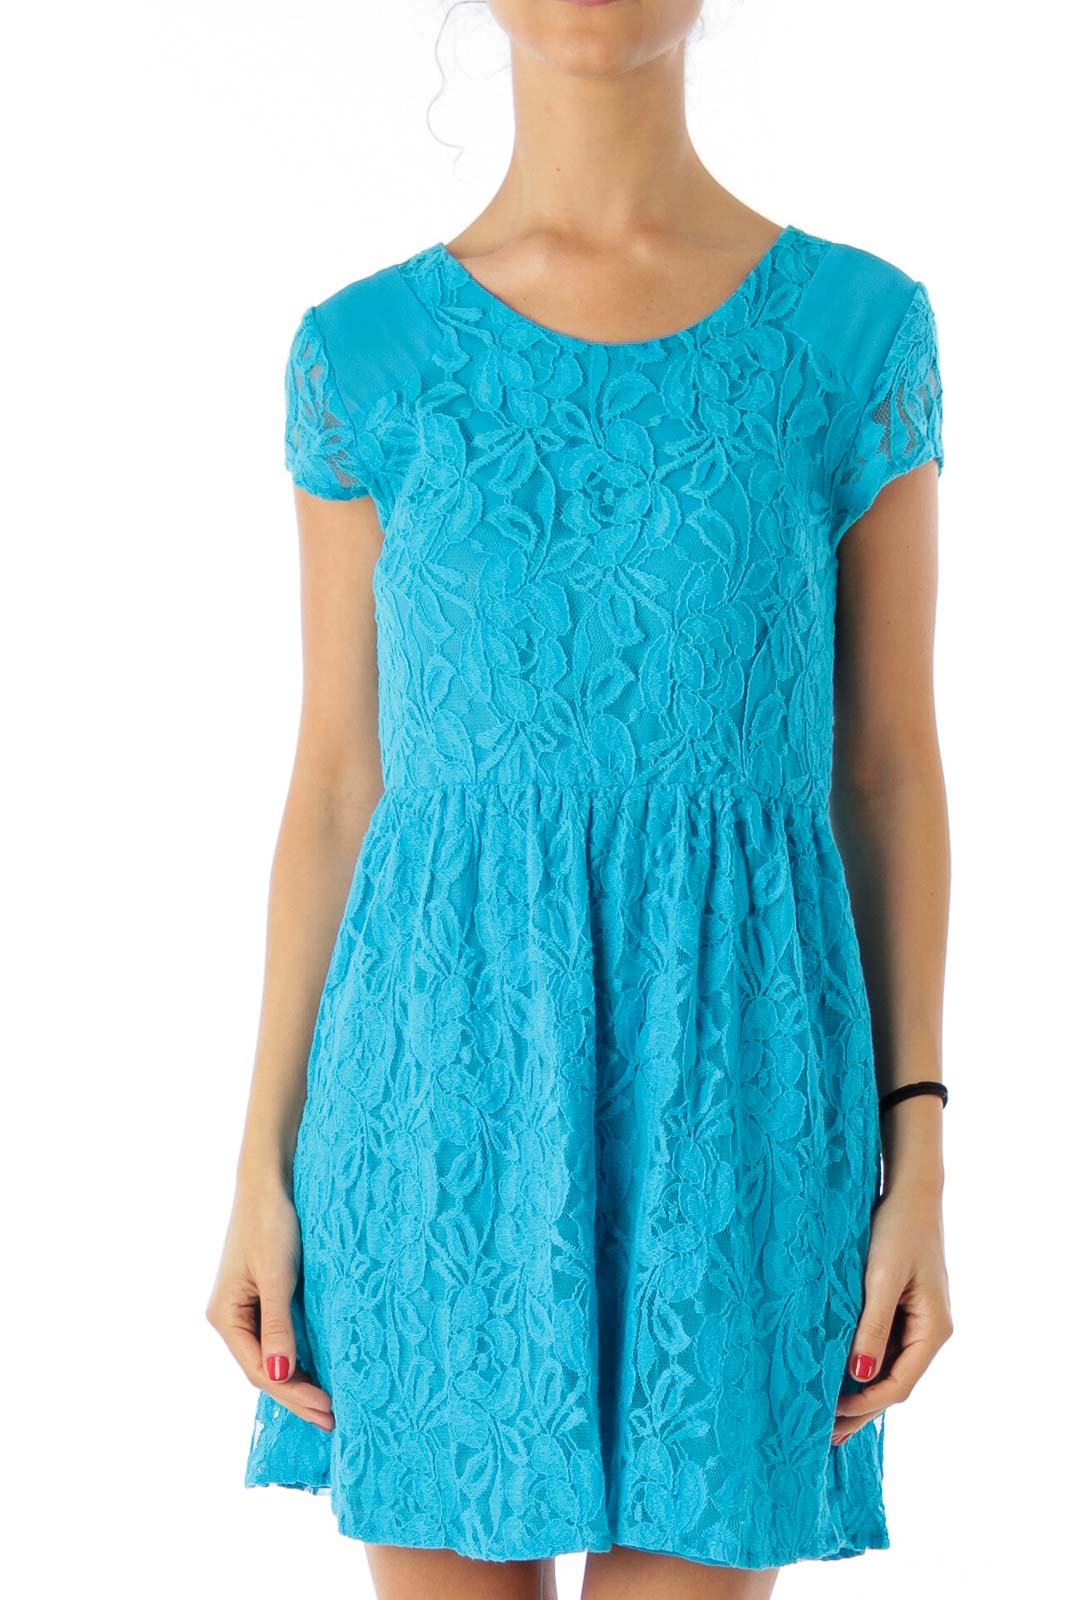 Turquoise Lace Layerd A-Line Dress Front